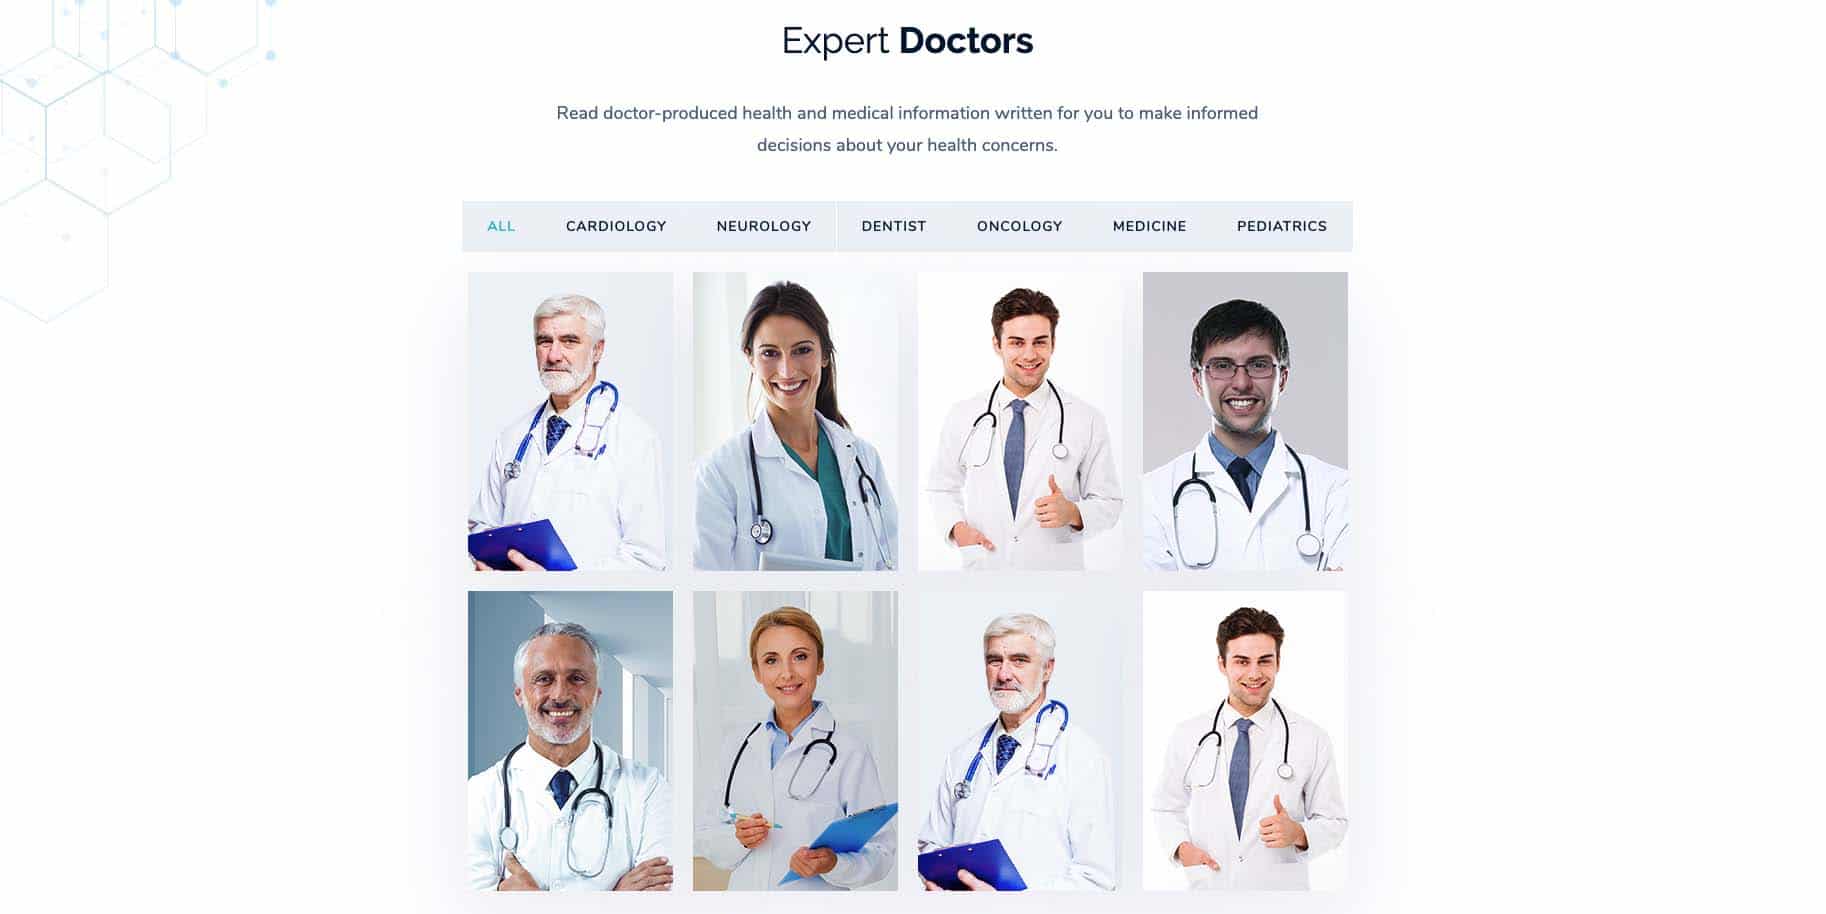 How To Make A Medical Website In WordPress Without Any Coding [FREE] 1